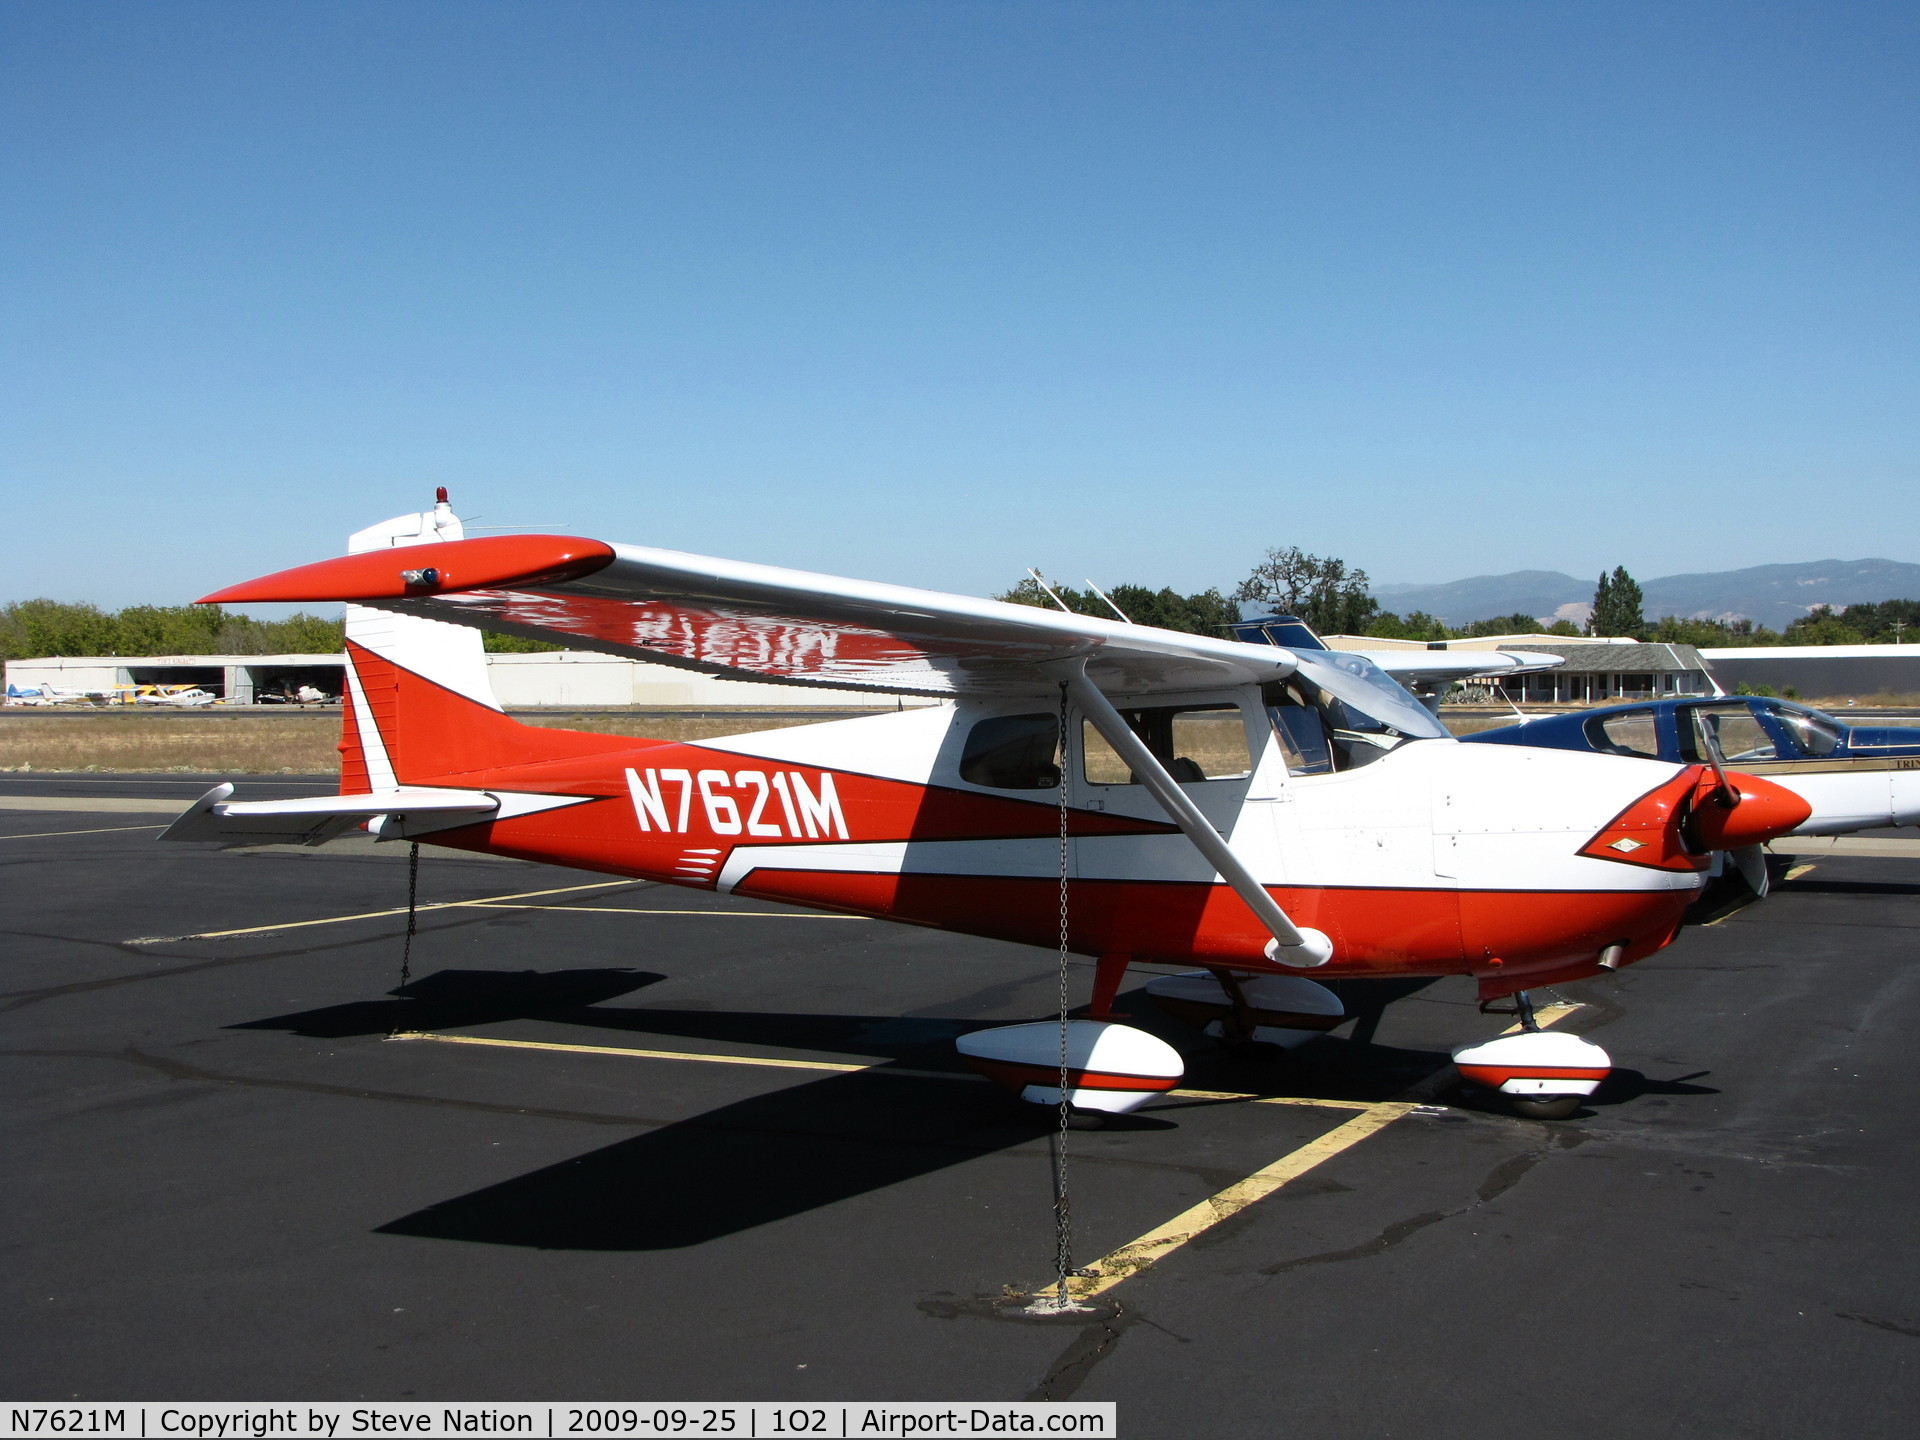 N7621M, 1959 Cessna 175 Skylark C/N 55921, A most beautifully painted straight-tail 1959 Cessna 175